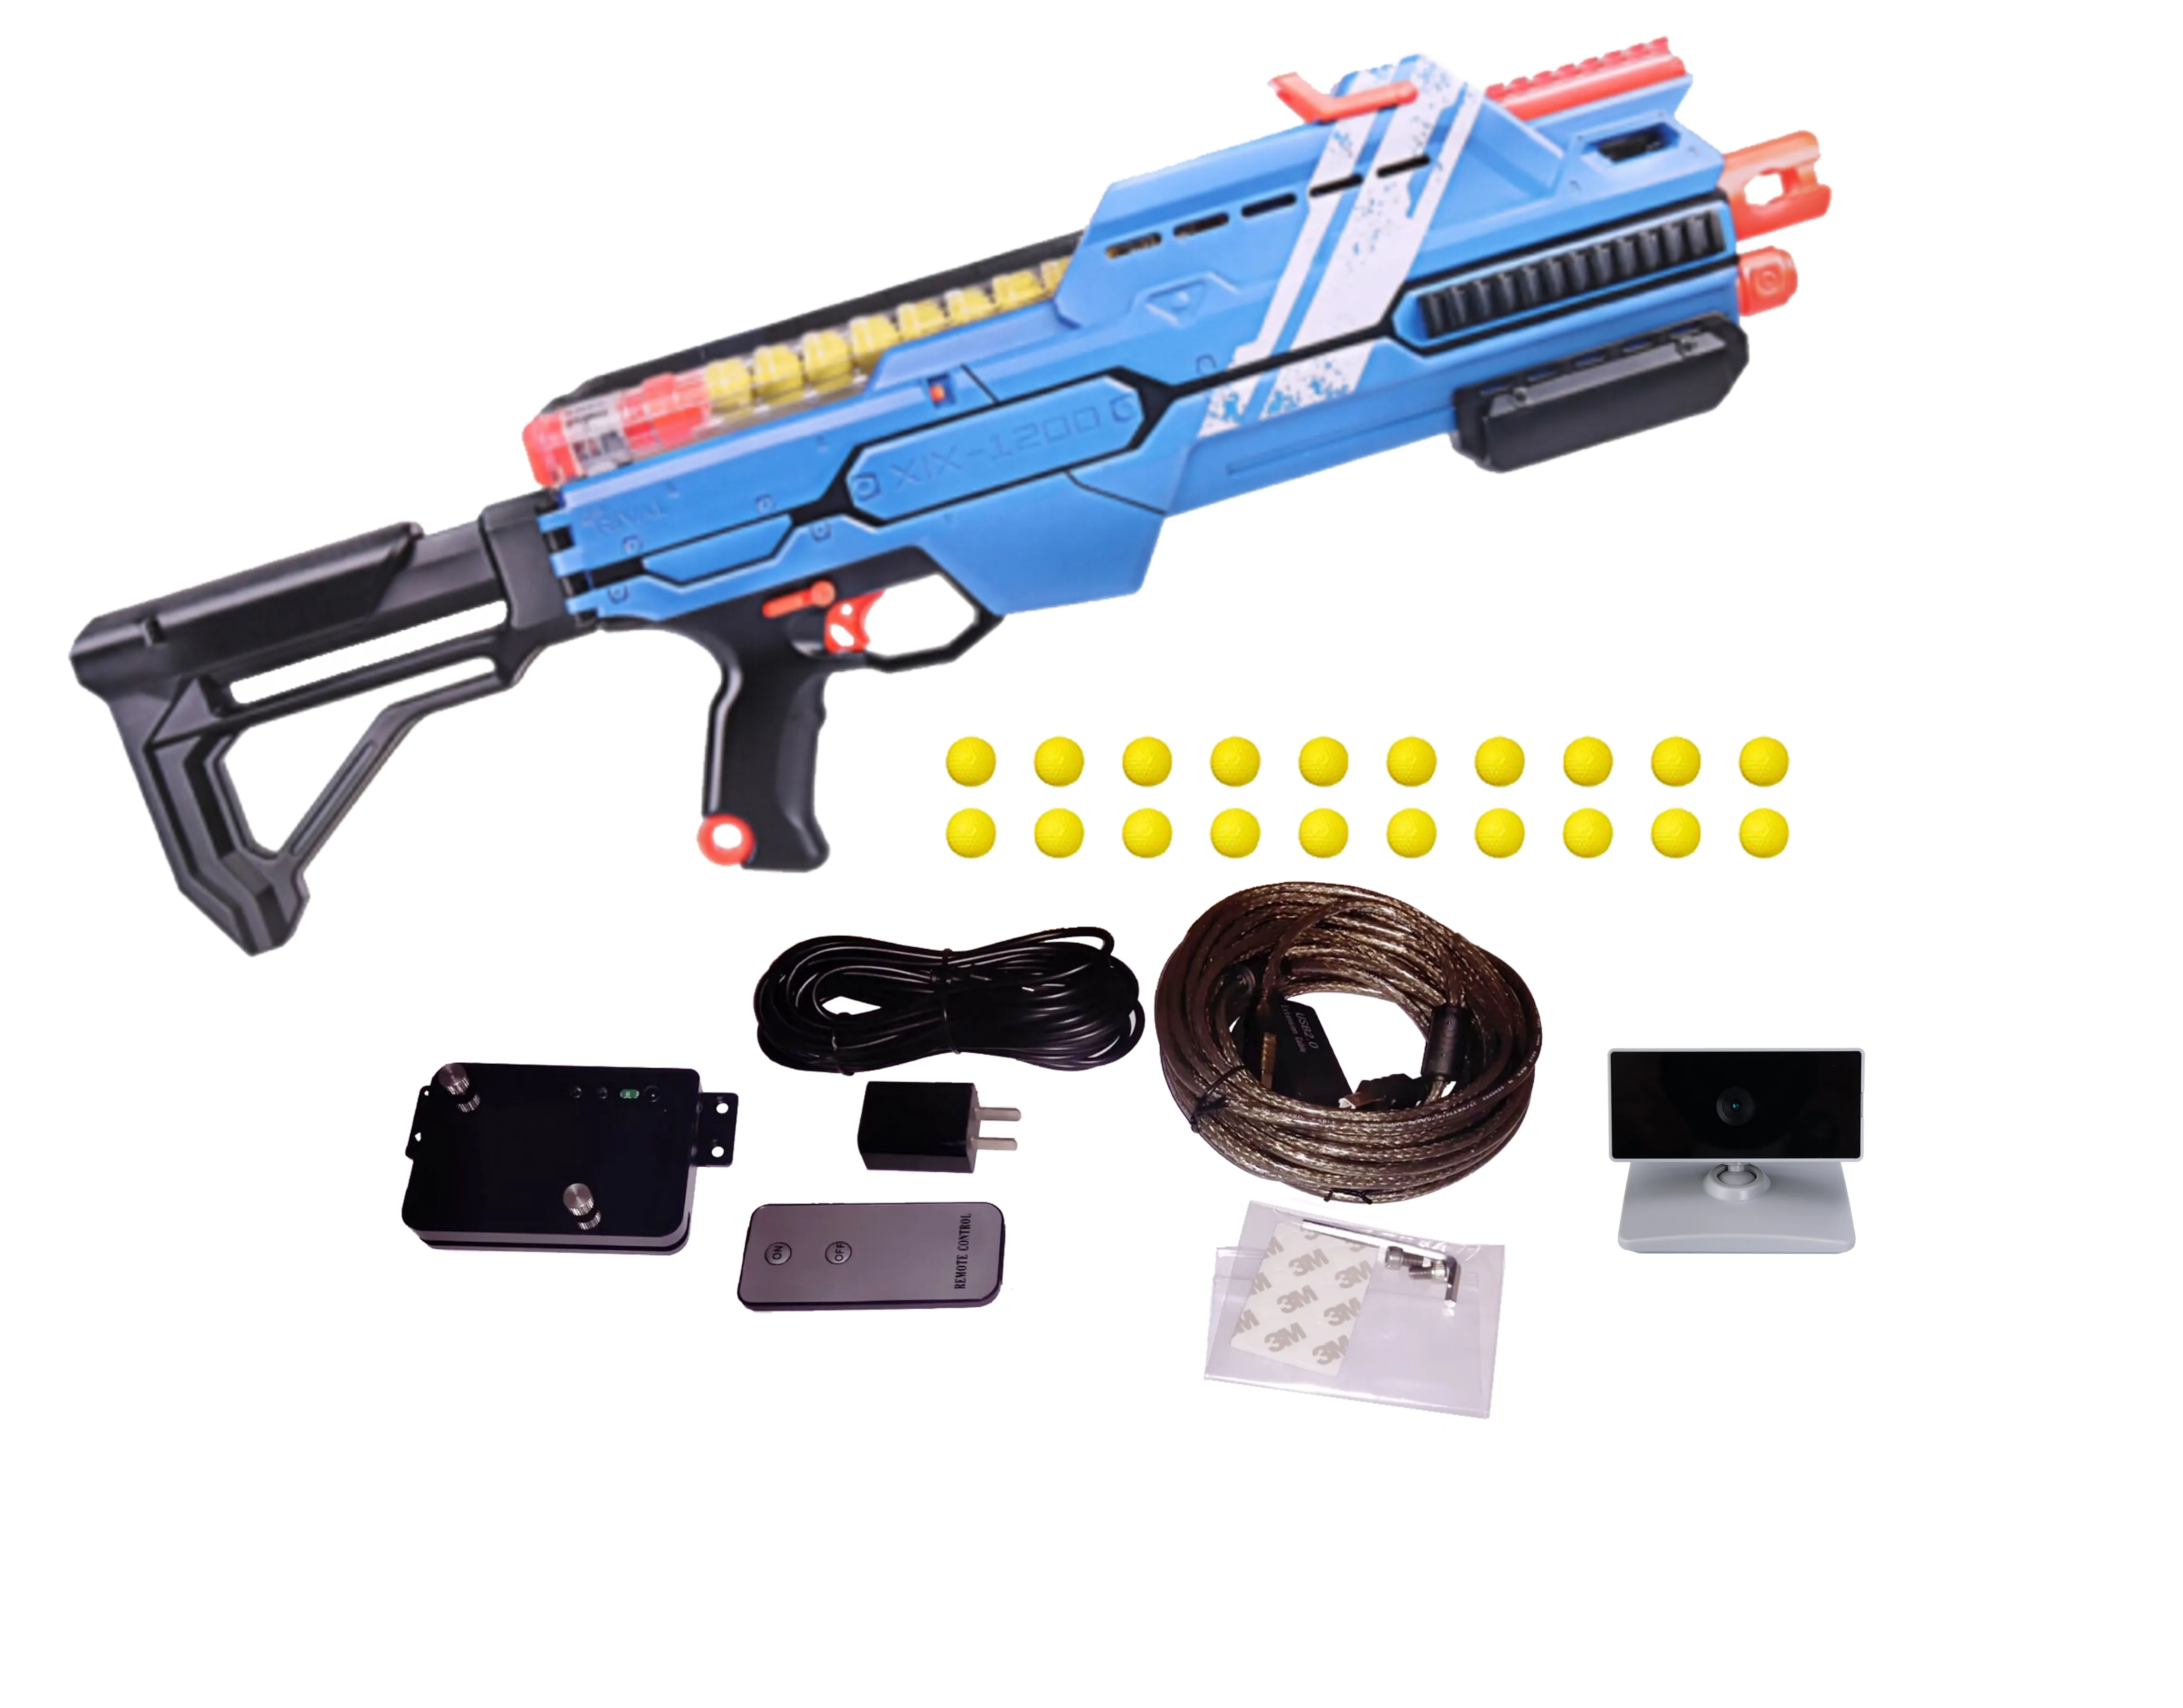 2021 Toy Pistol Working With Portable Smart board Interactive Whiteboard Children People Playing Funny Interactive Games